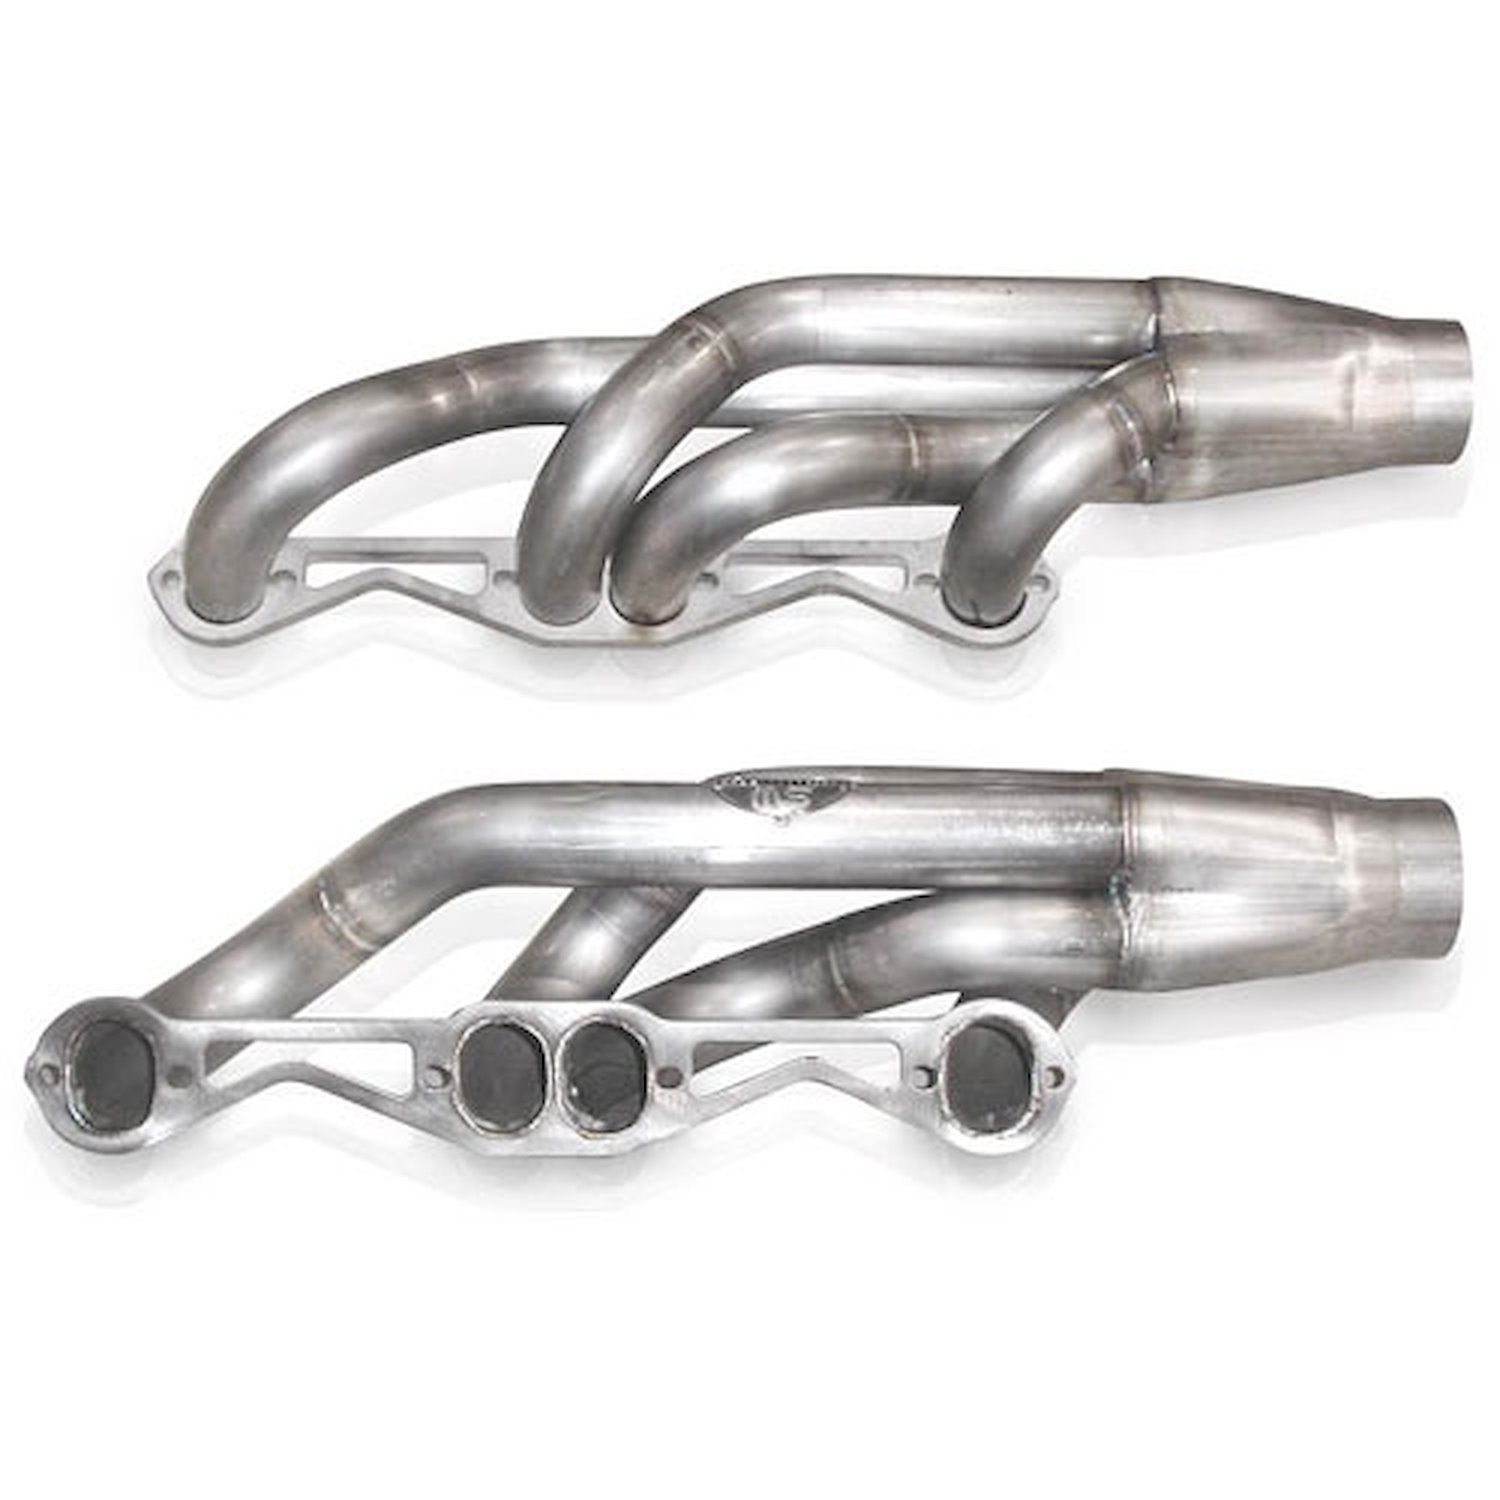 Up and Forward Turbo Headers Small Block Chevy